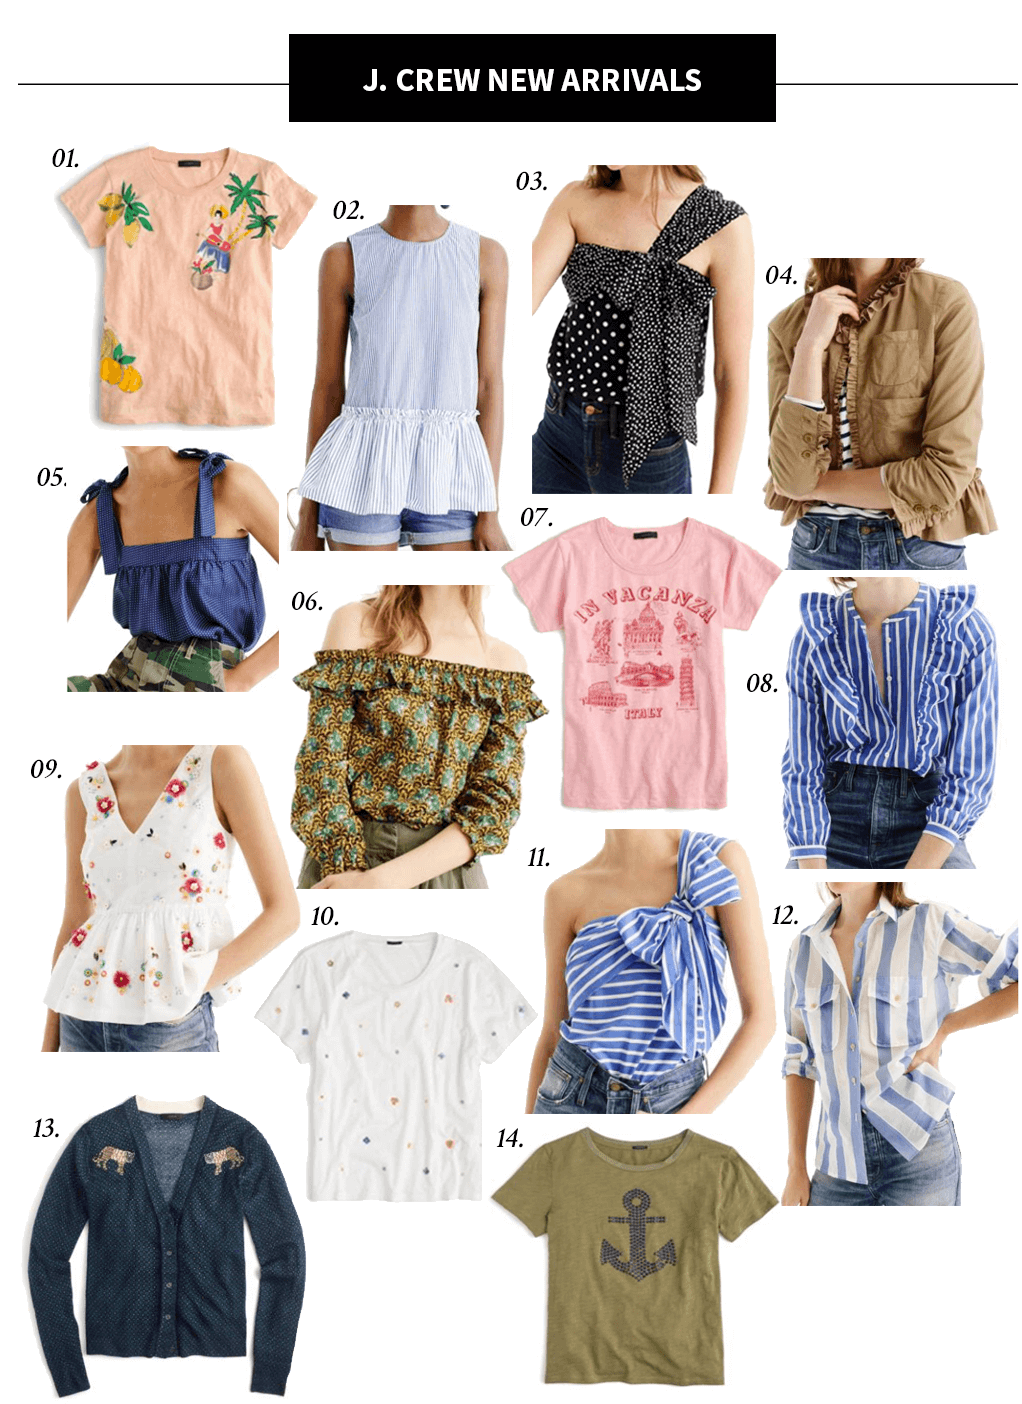 J Crew, New Arrivals, Shopping Guide